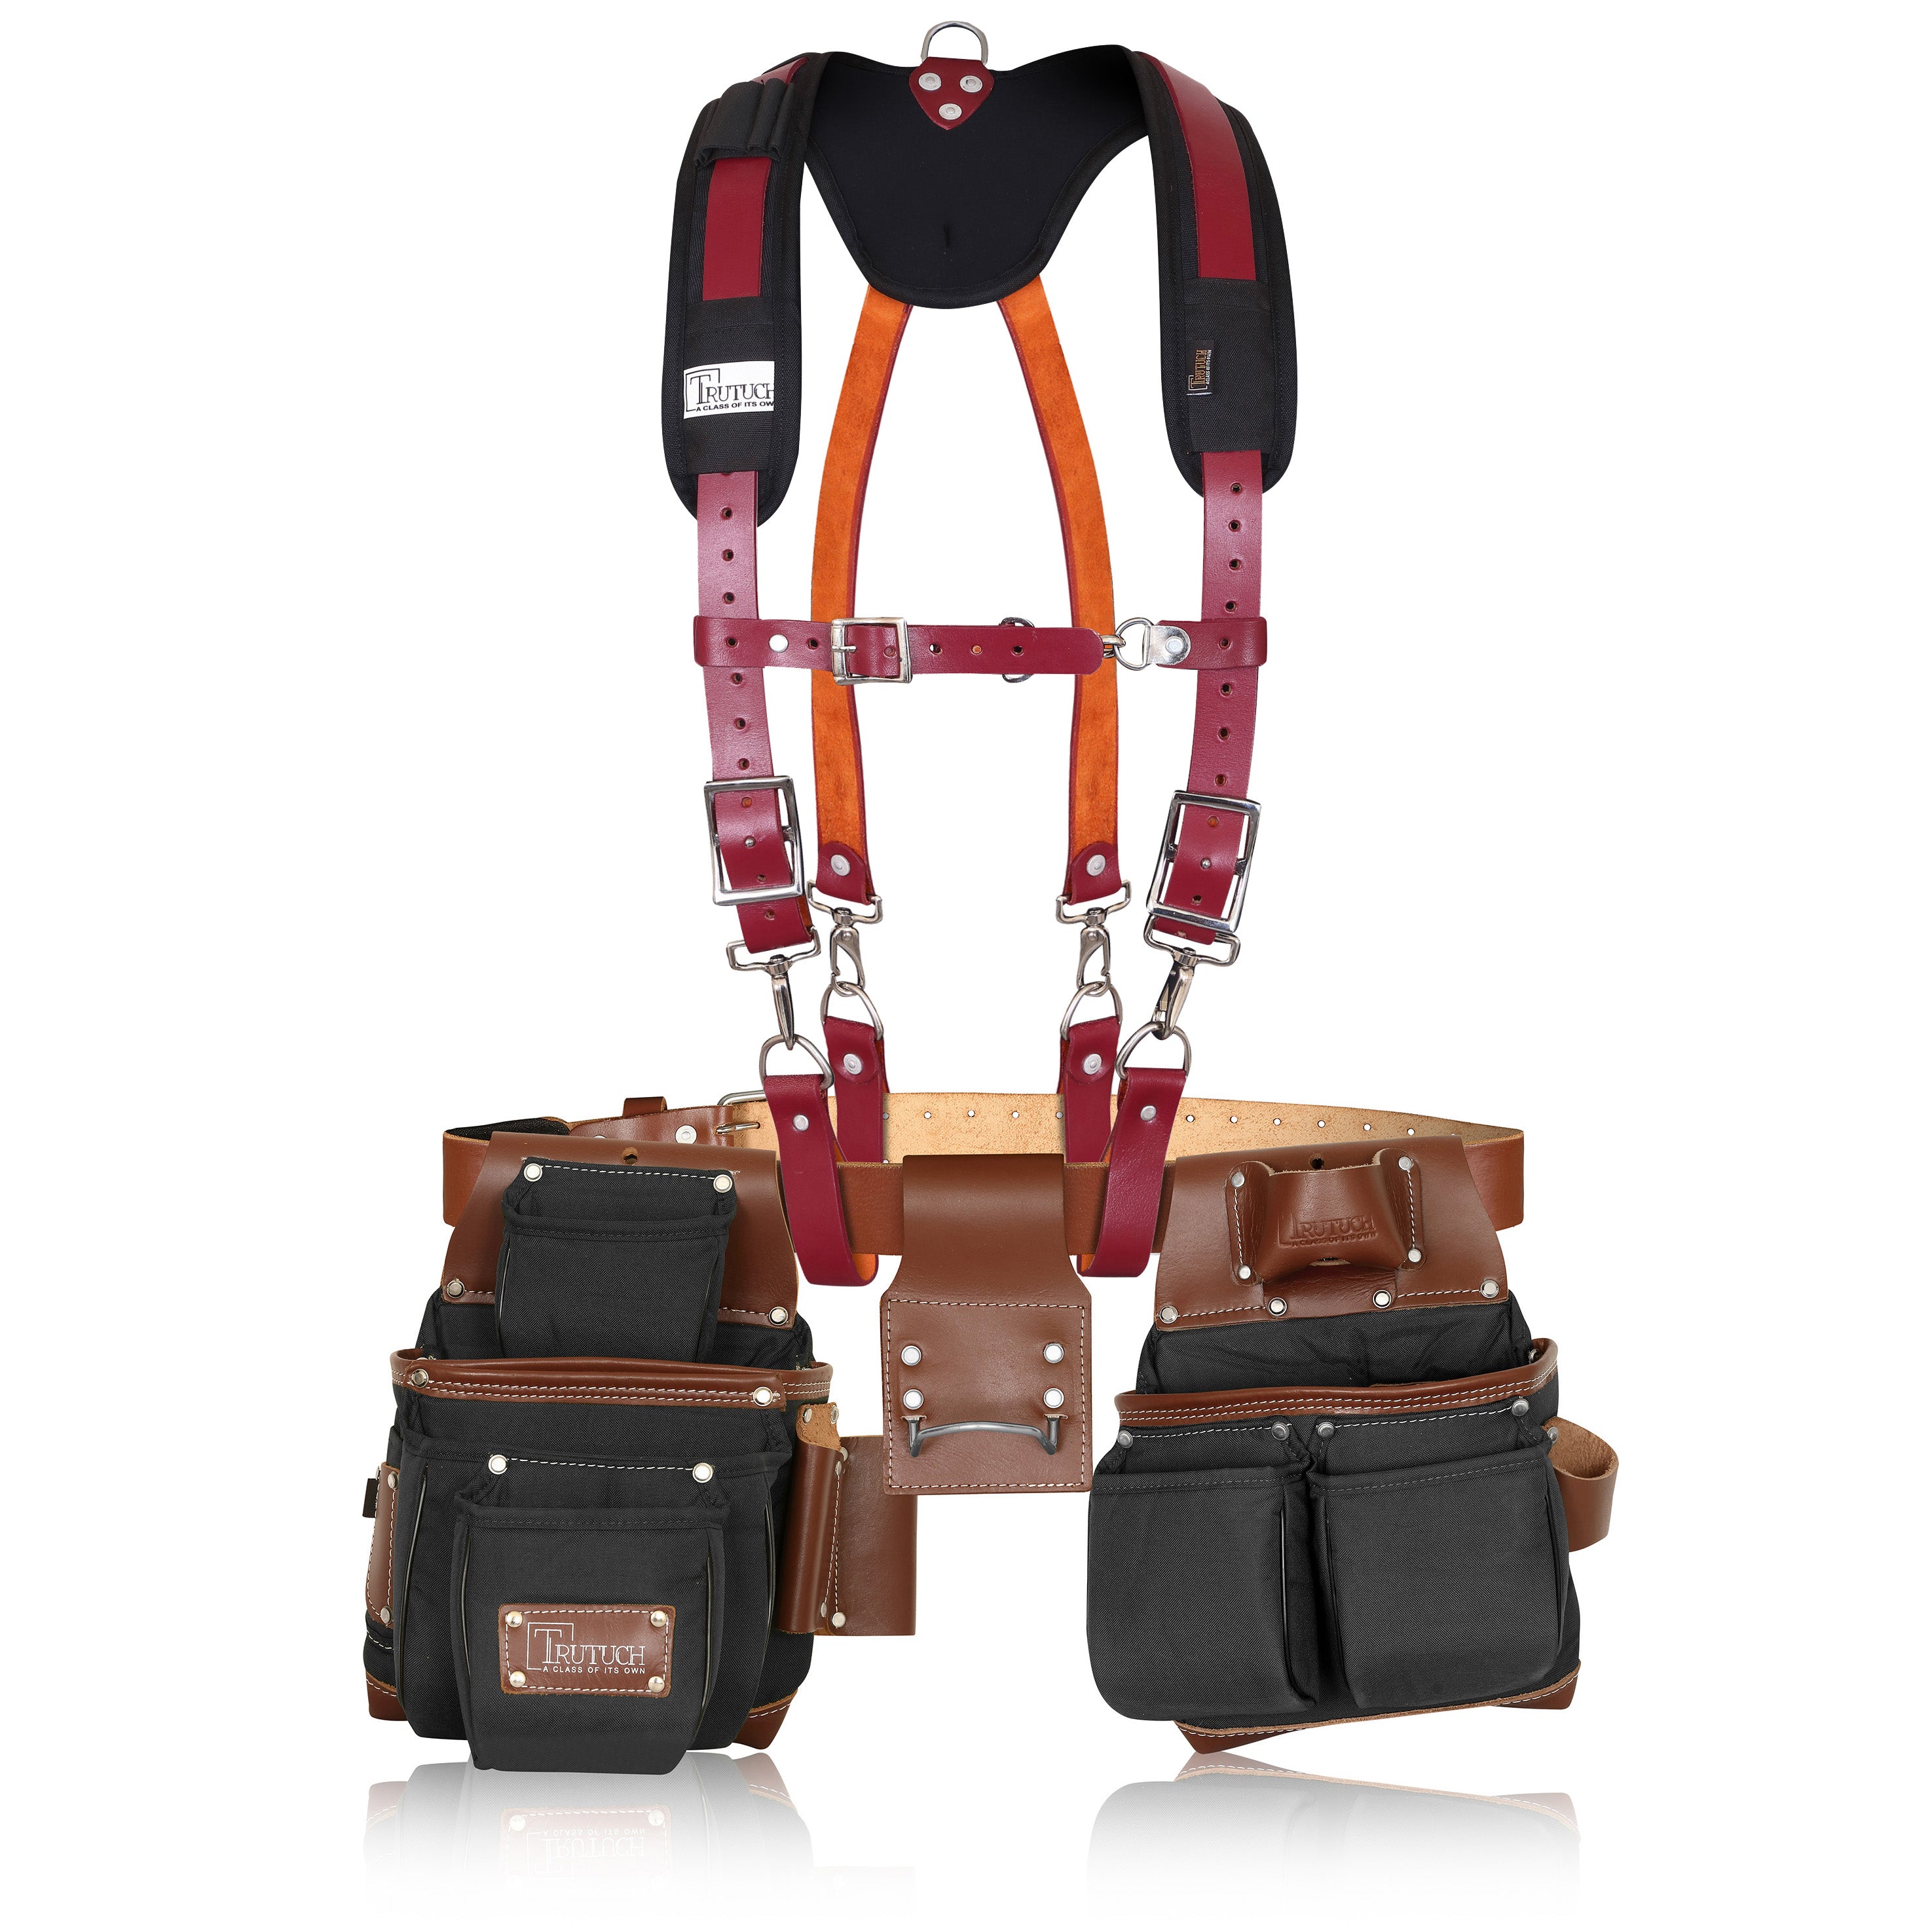 Trutuch Black Nylon & Leather Tool Belt with Leather Work Suspender, Framers Tool Belt, Electrician, Construction, Drywall Tool Belt, TT-1520-R-7010-S